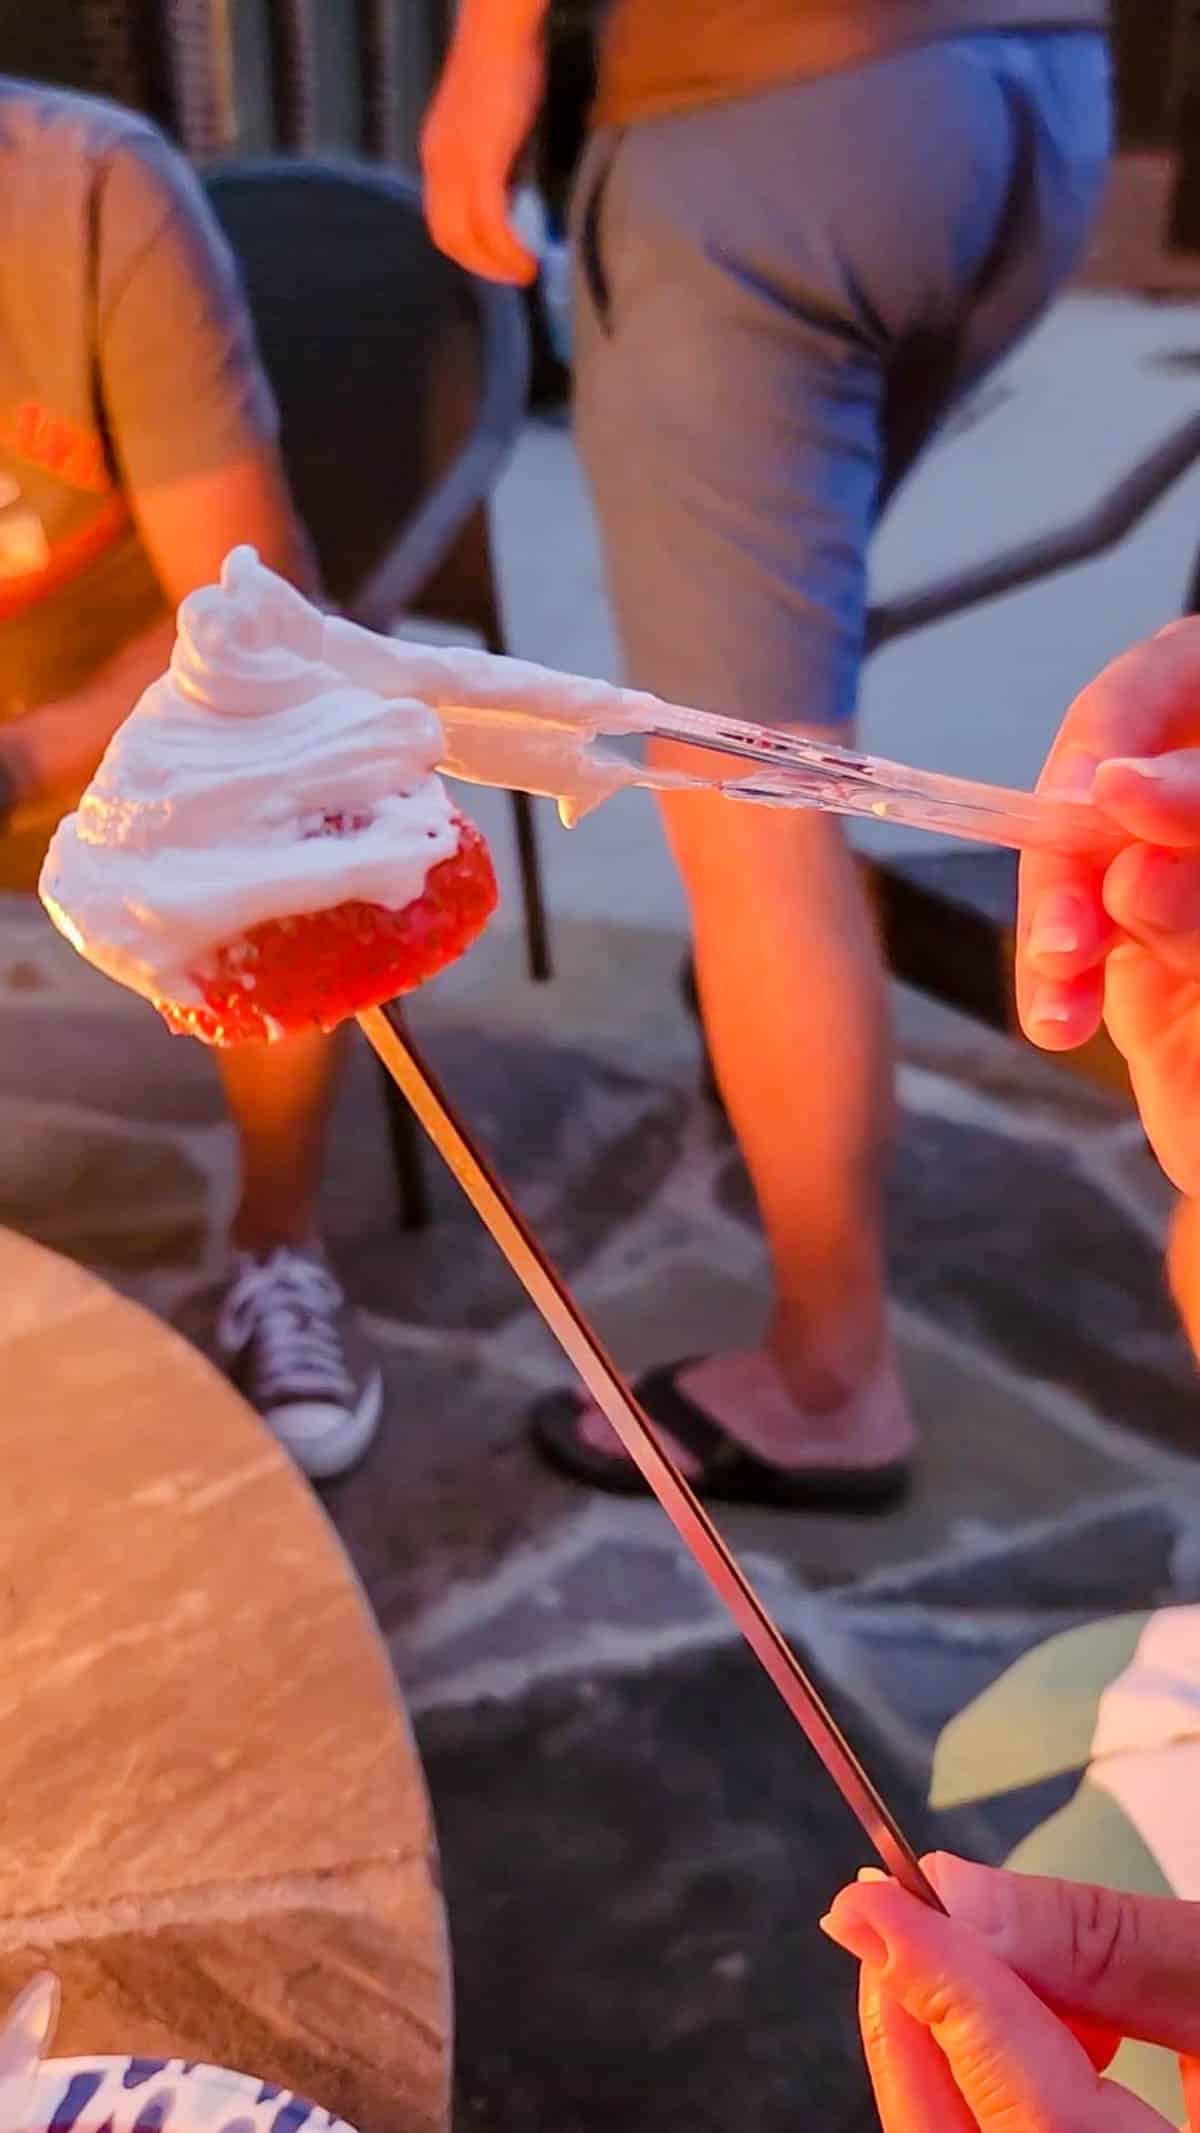 smearing marshmallow fluff on a strawberry